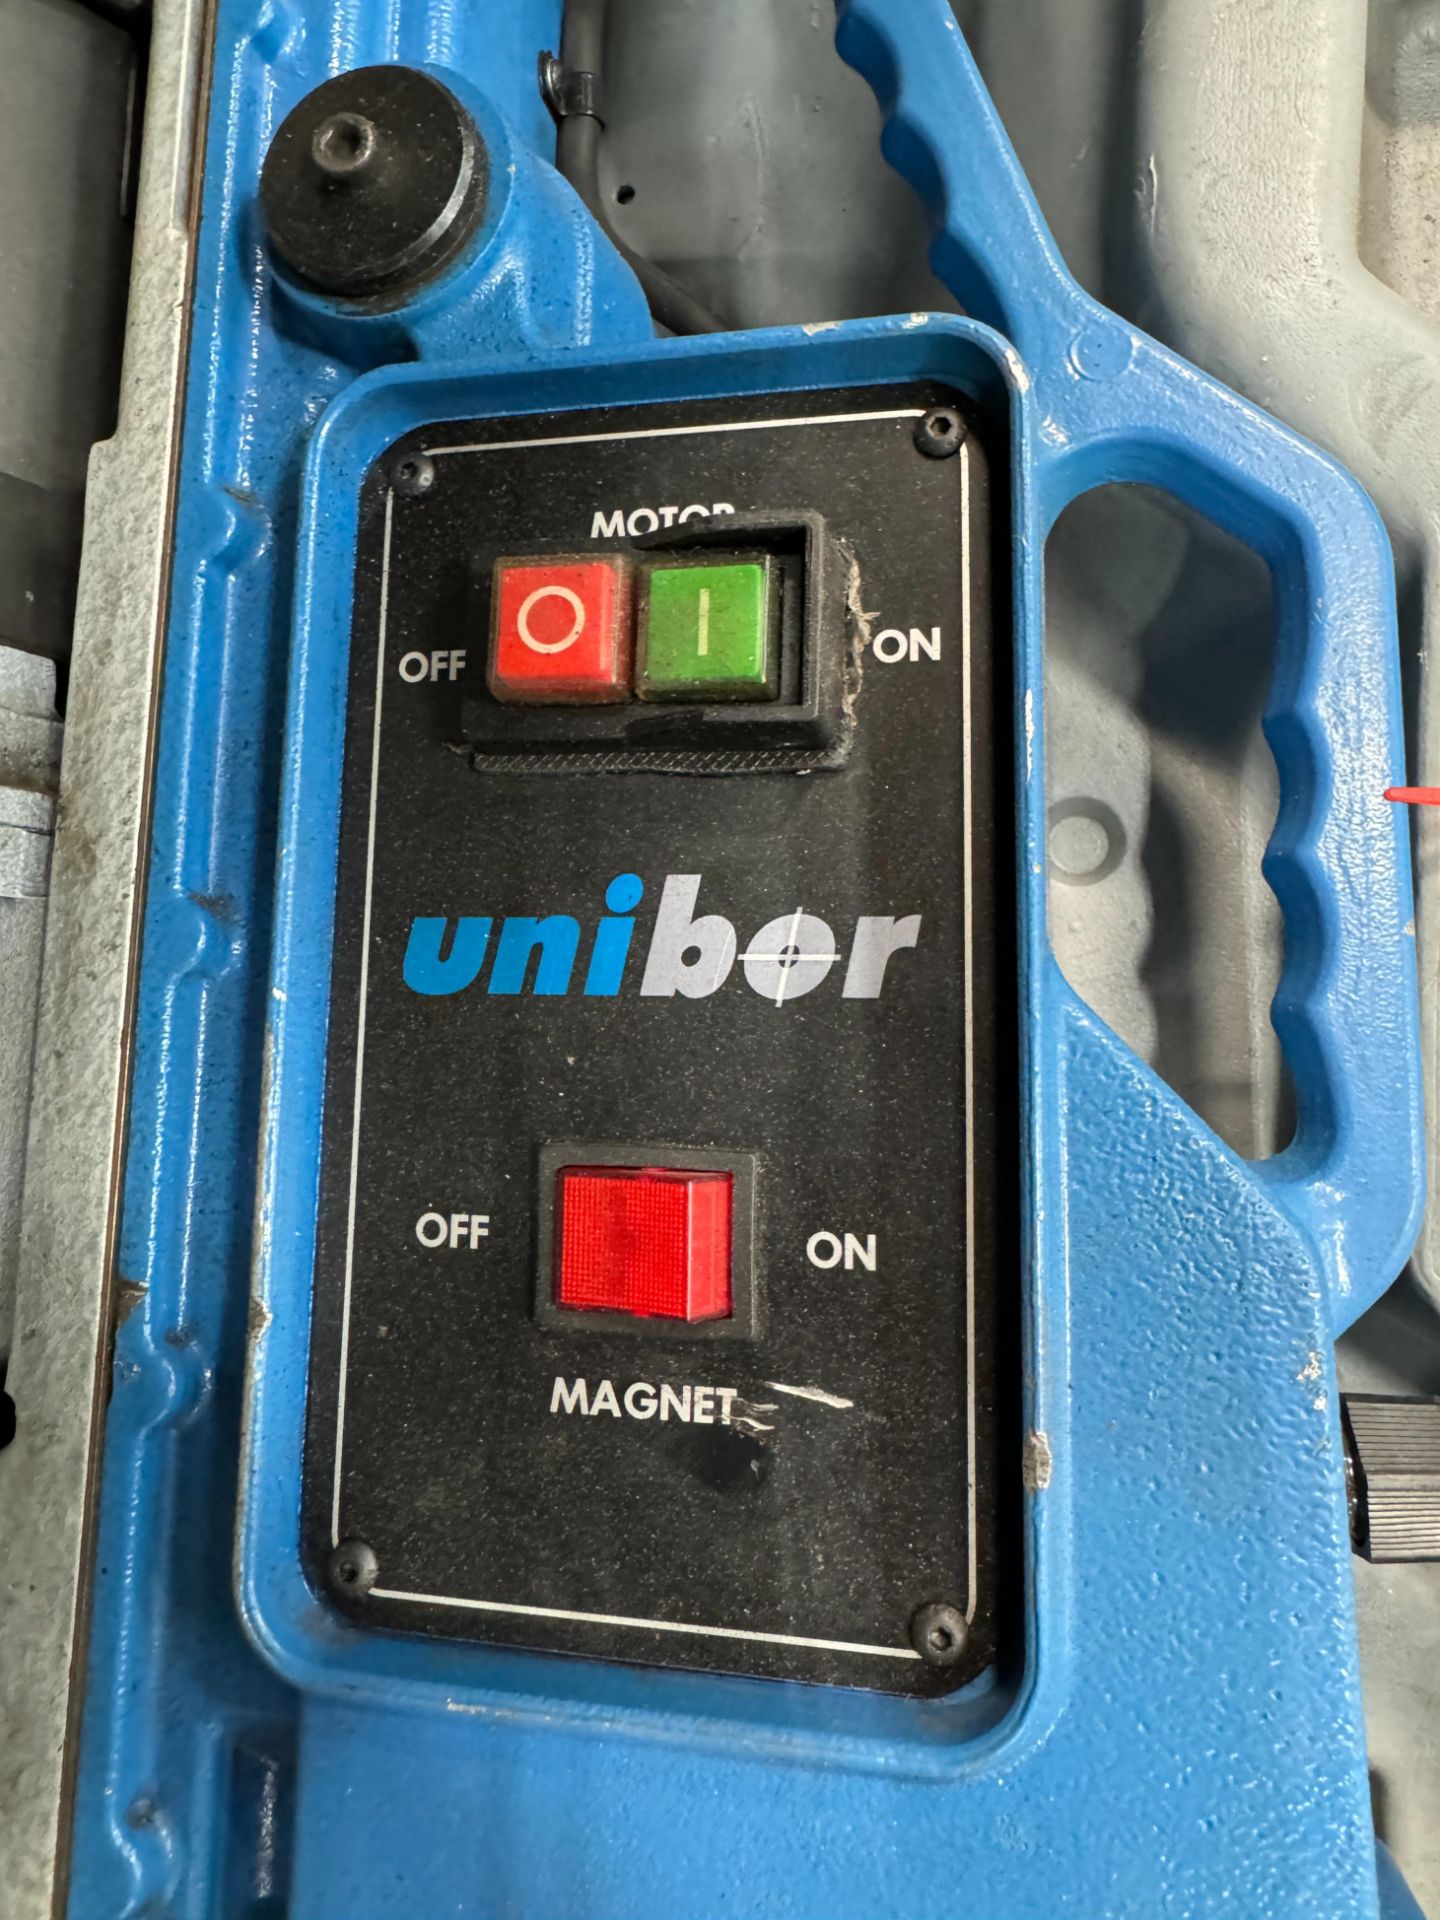 UNIBOR MAGNETIC BASED DRILL, W/ CASE - Image 3 of 4